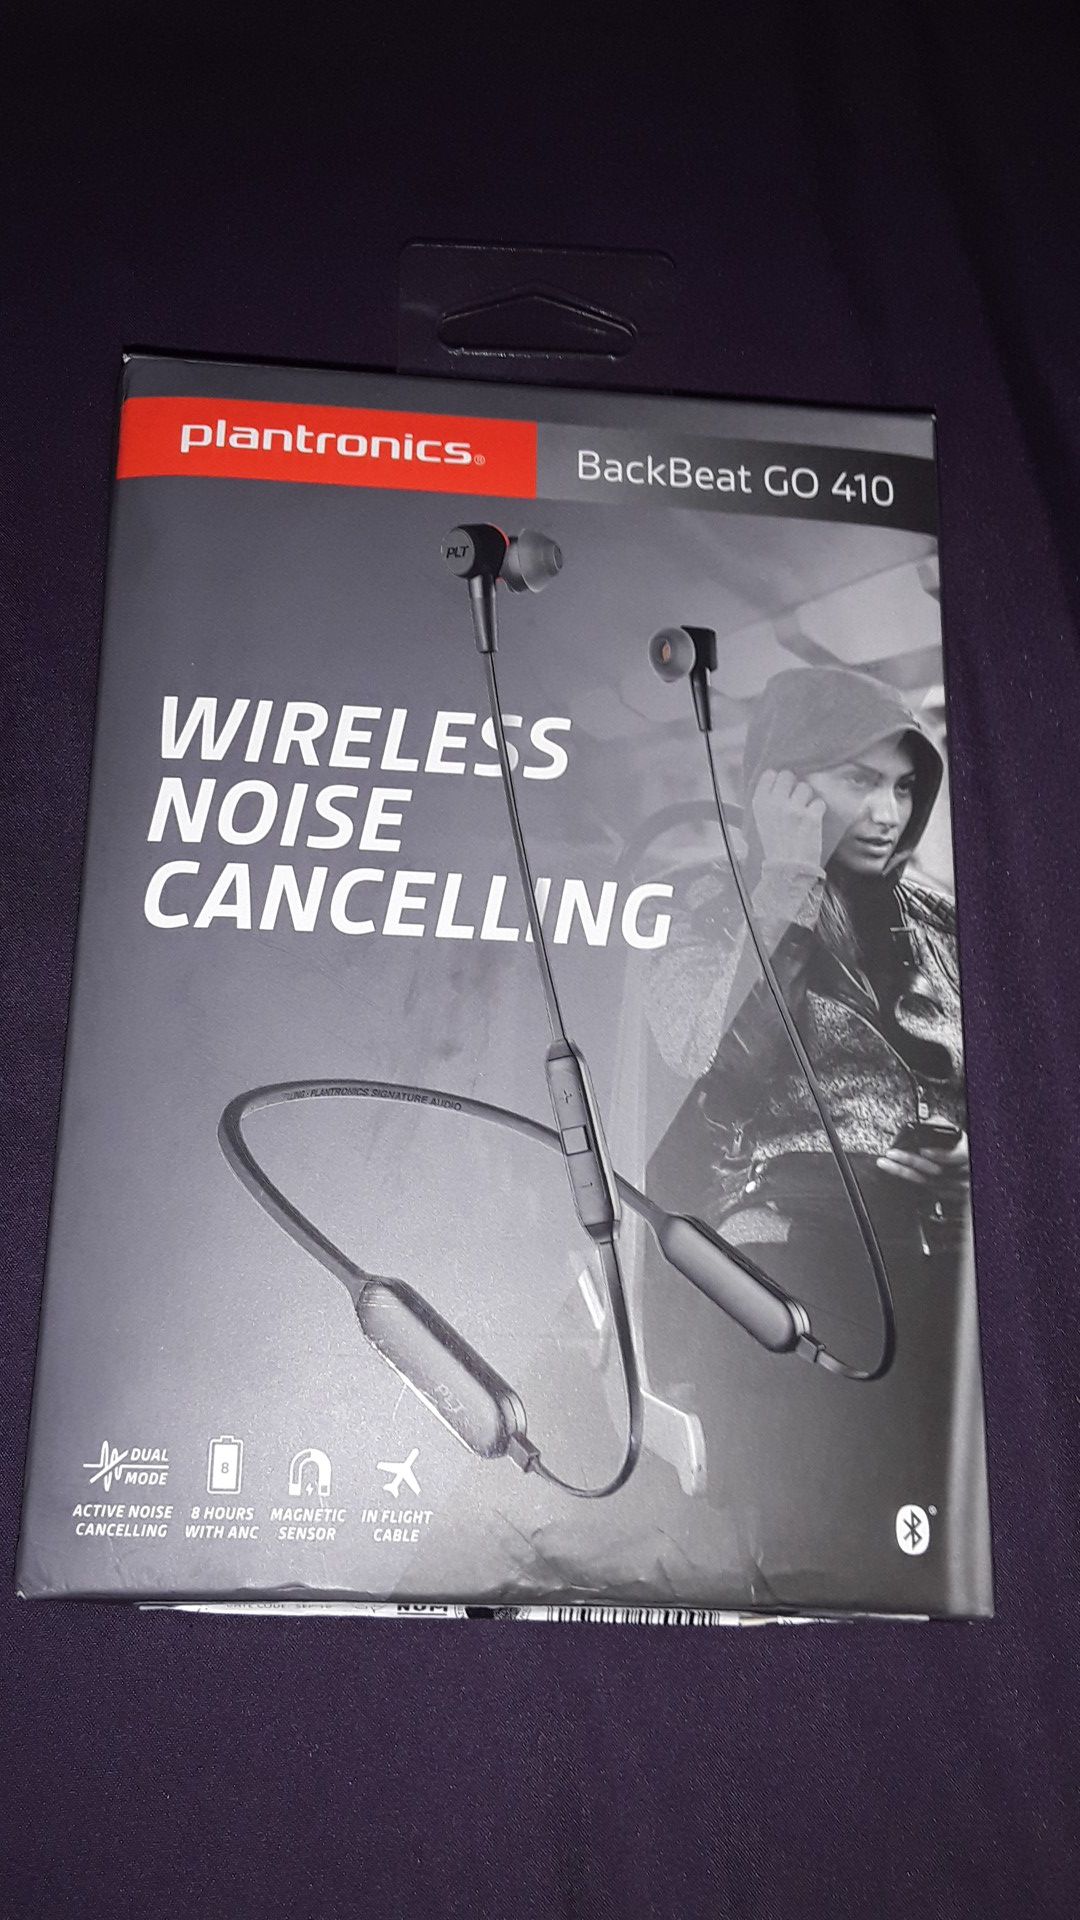 Back Beat wireless noise cancelling